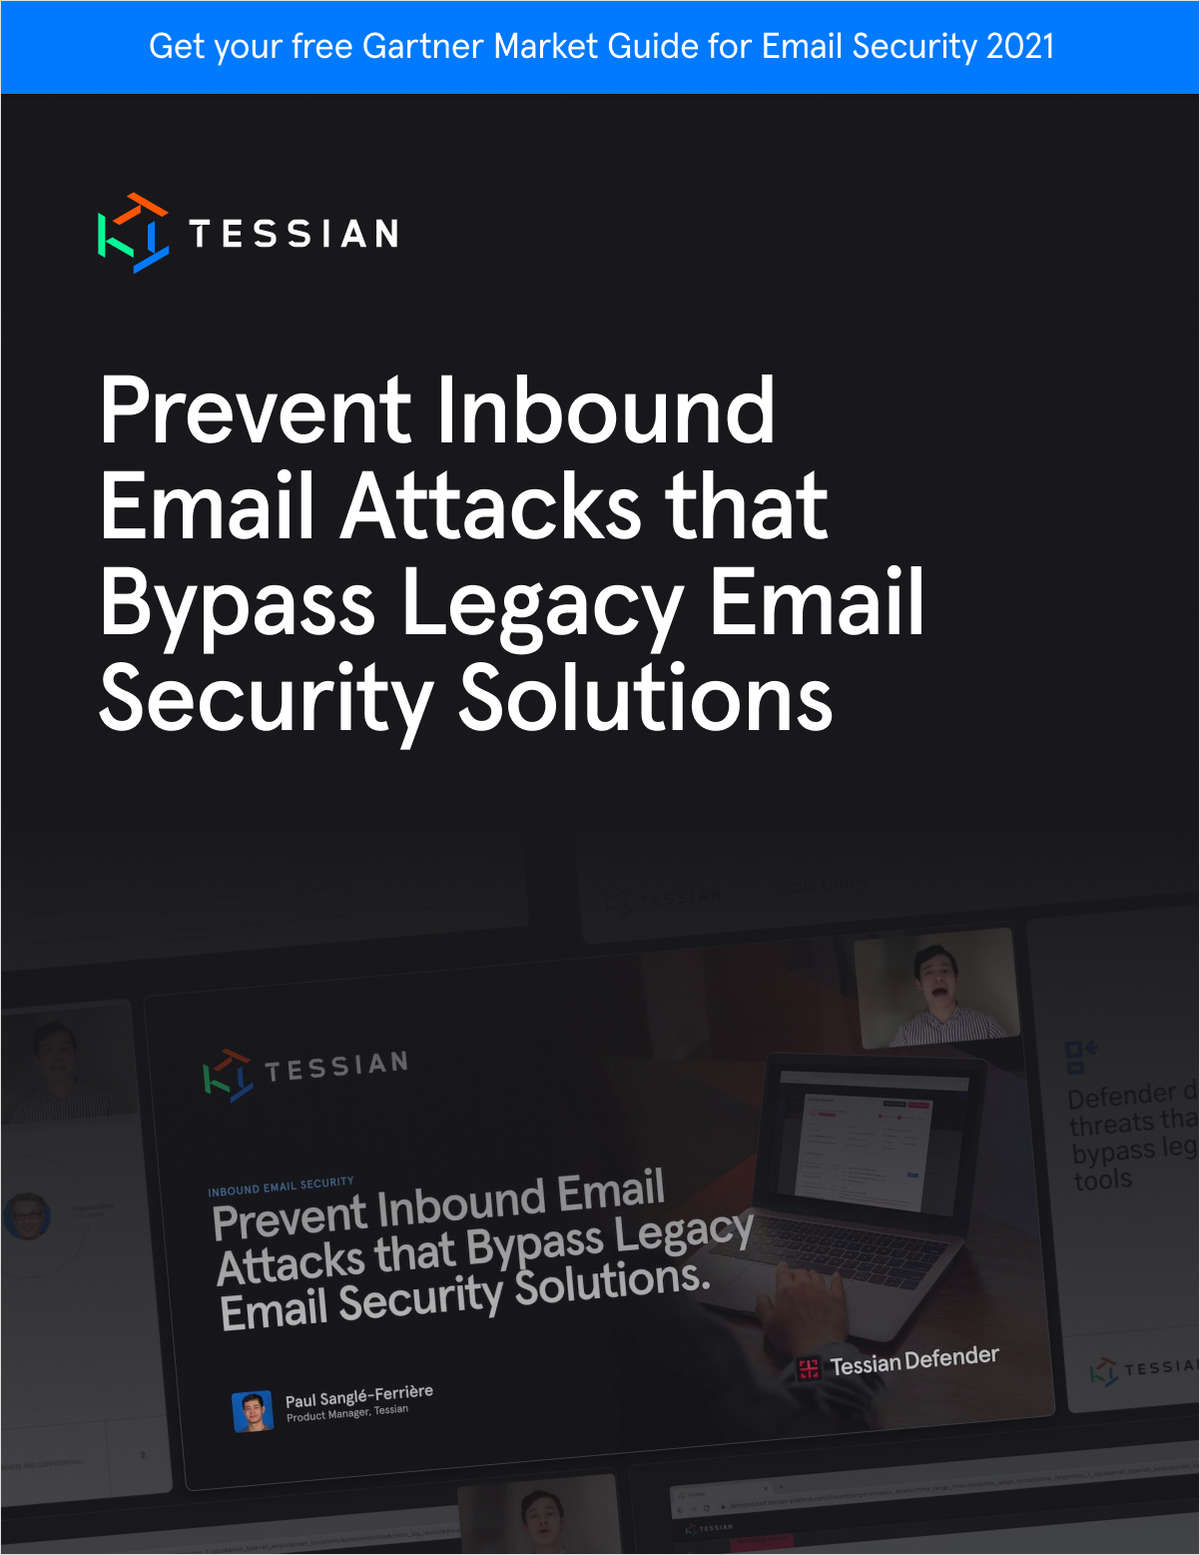 Prevent Inbound Attacks that Bypass Legacy Email Security Solutions